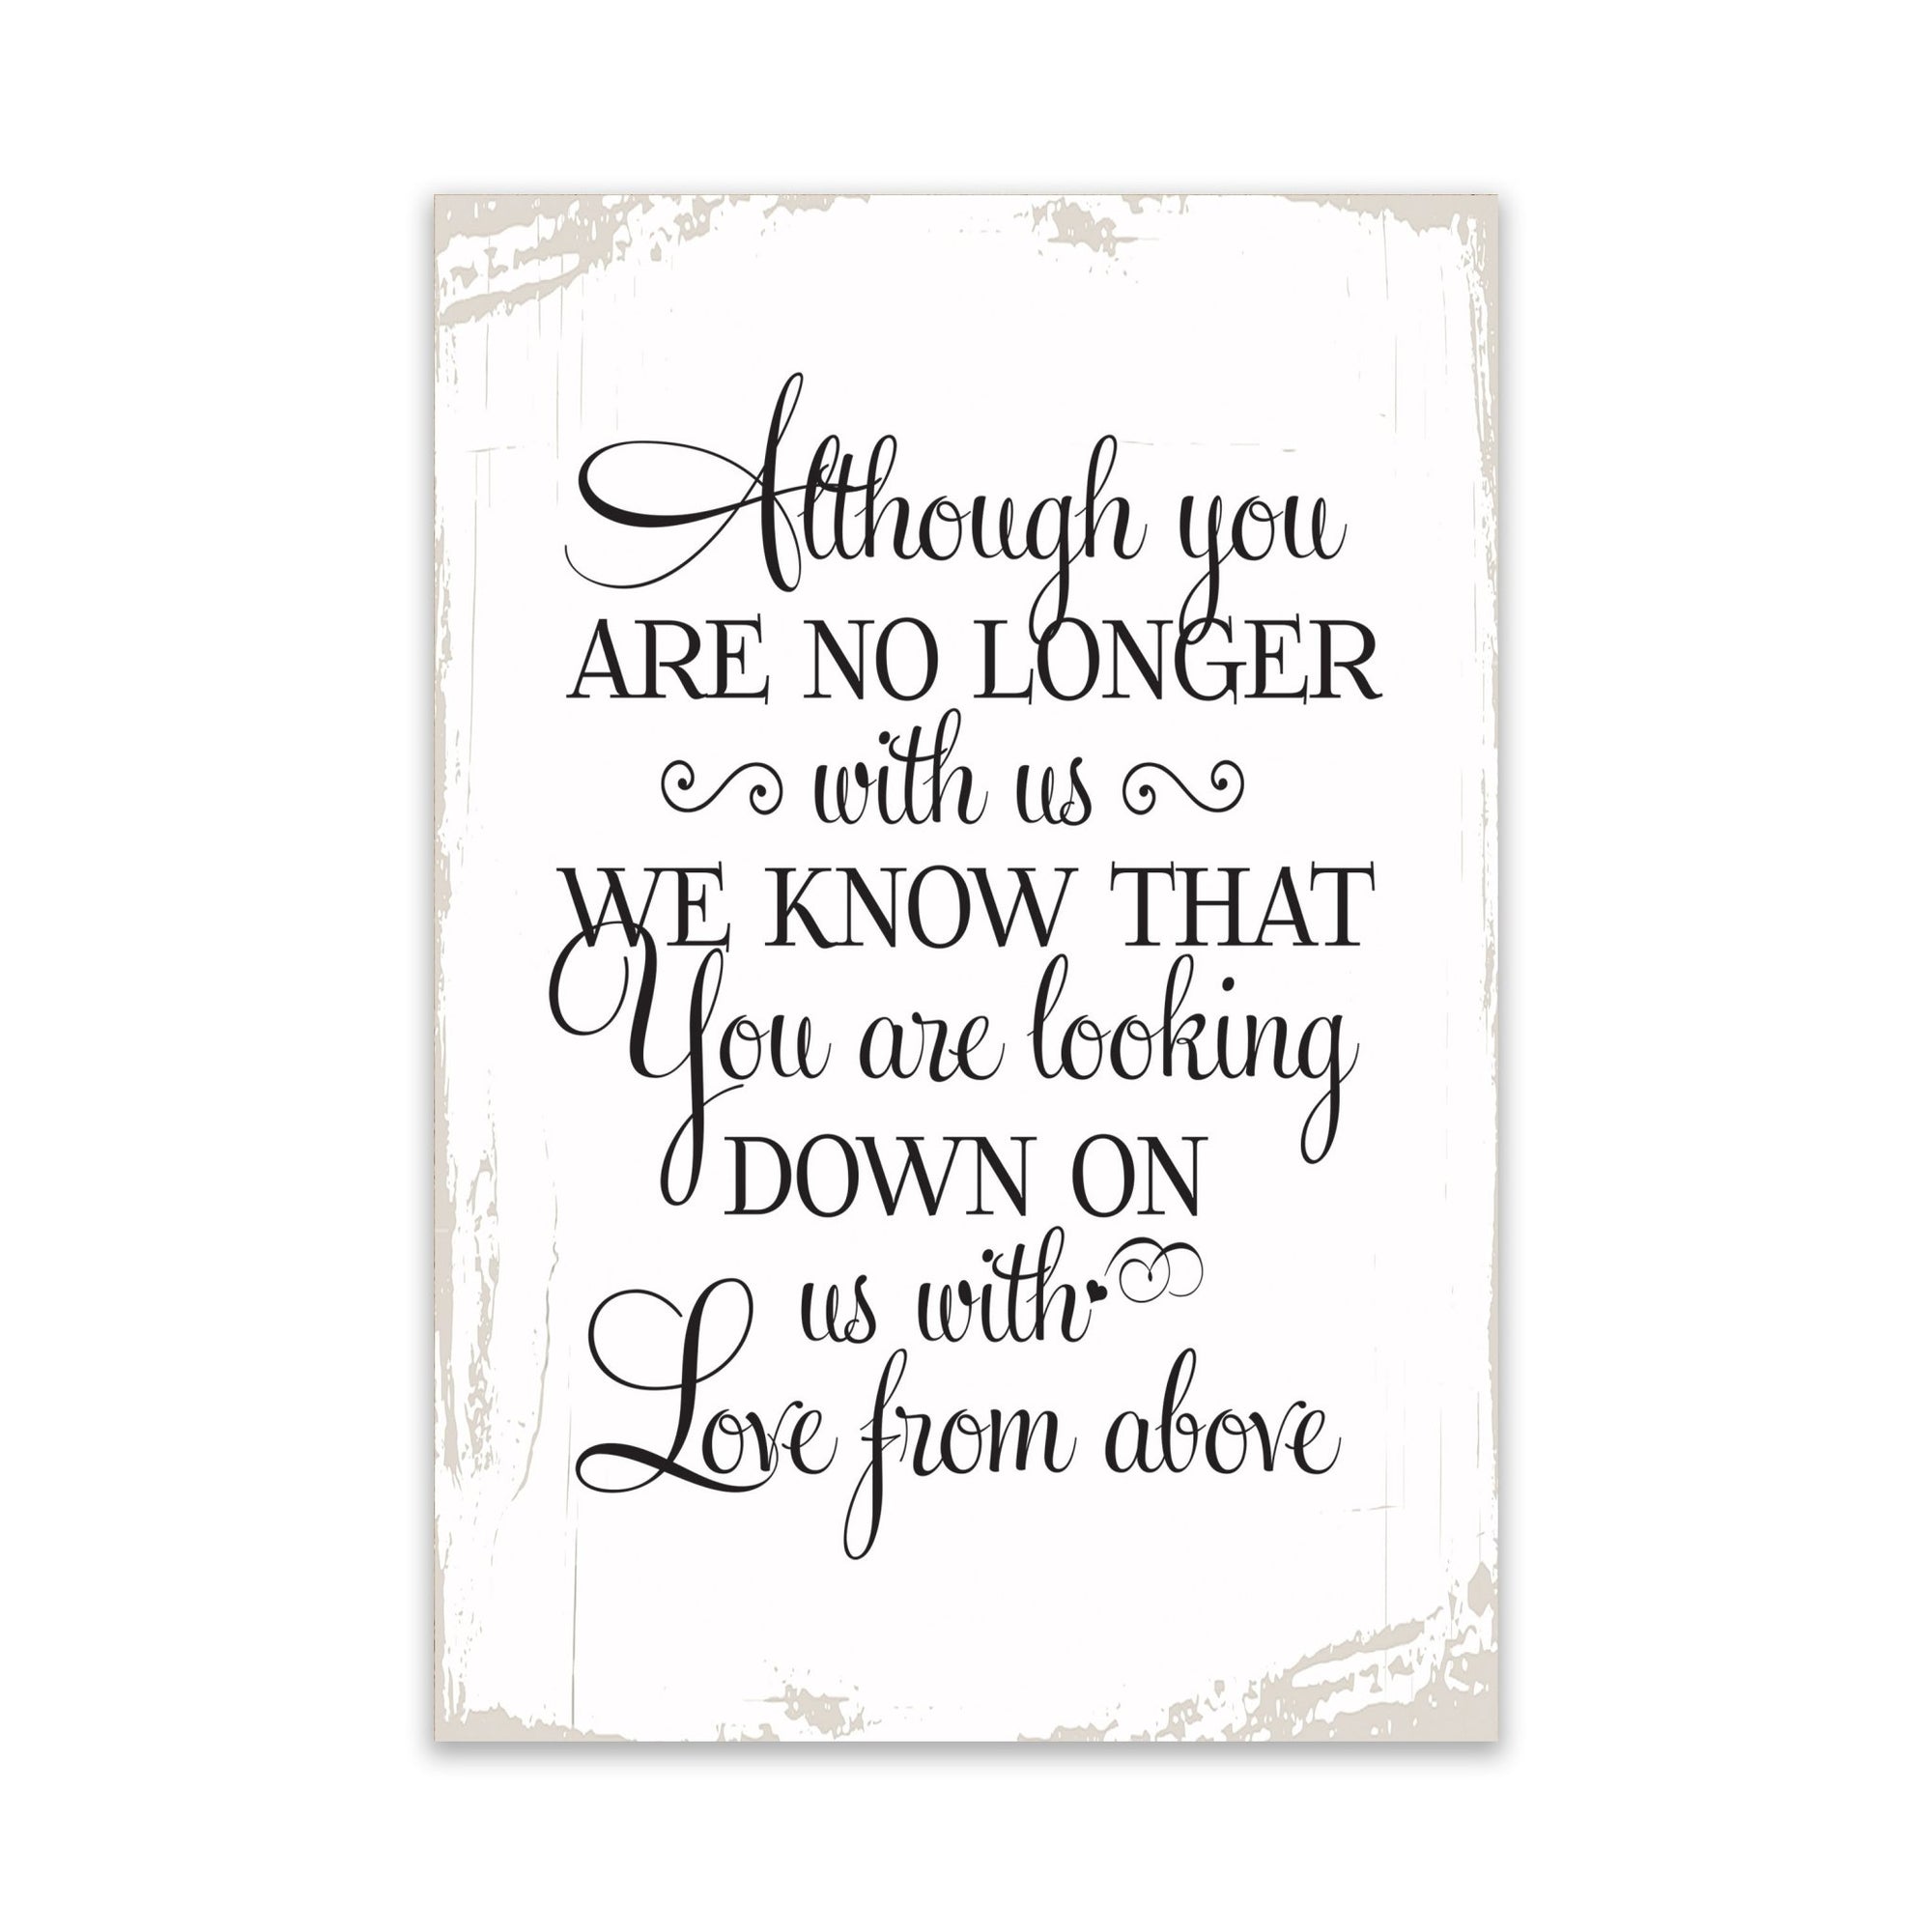 Modern Inspirational Memorial 5.5x 8 inches Wooden Sign Love From Above - Plaque Tabletop Decoration Loss of Loved One Bereavement Sympathy Keepsake - LifeSong Milestones